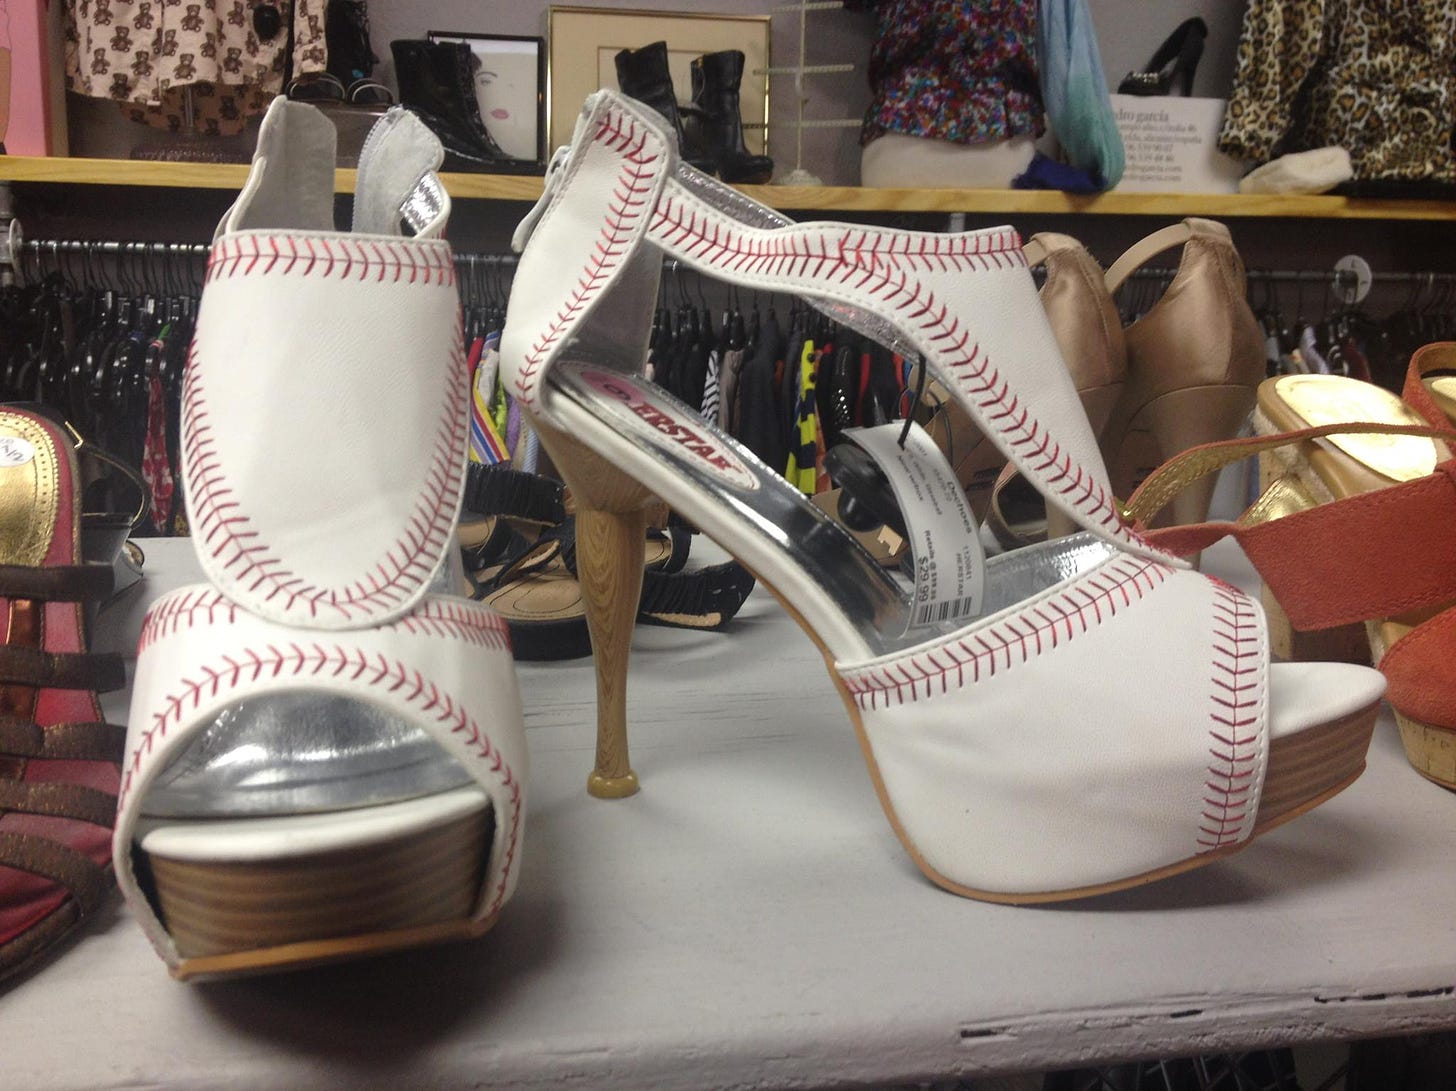 a pair of high heeled women's shoes made from white leather with red stitching, like baseballs, with little baseball bats for the spike heels.